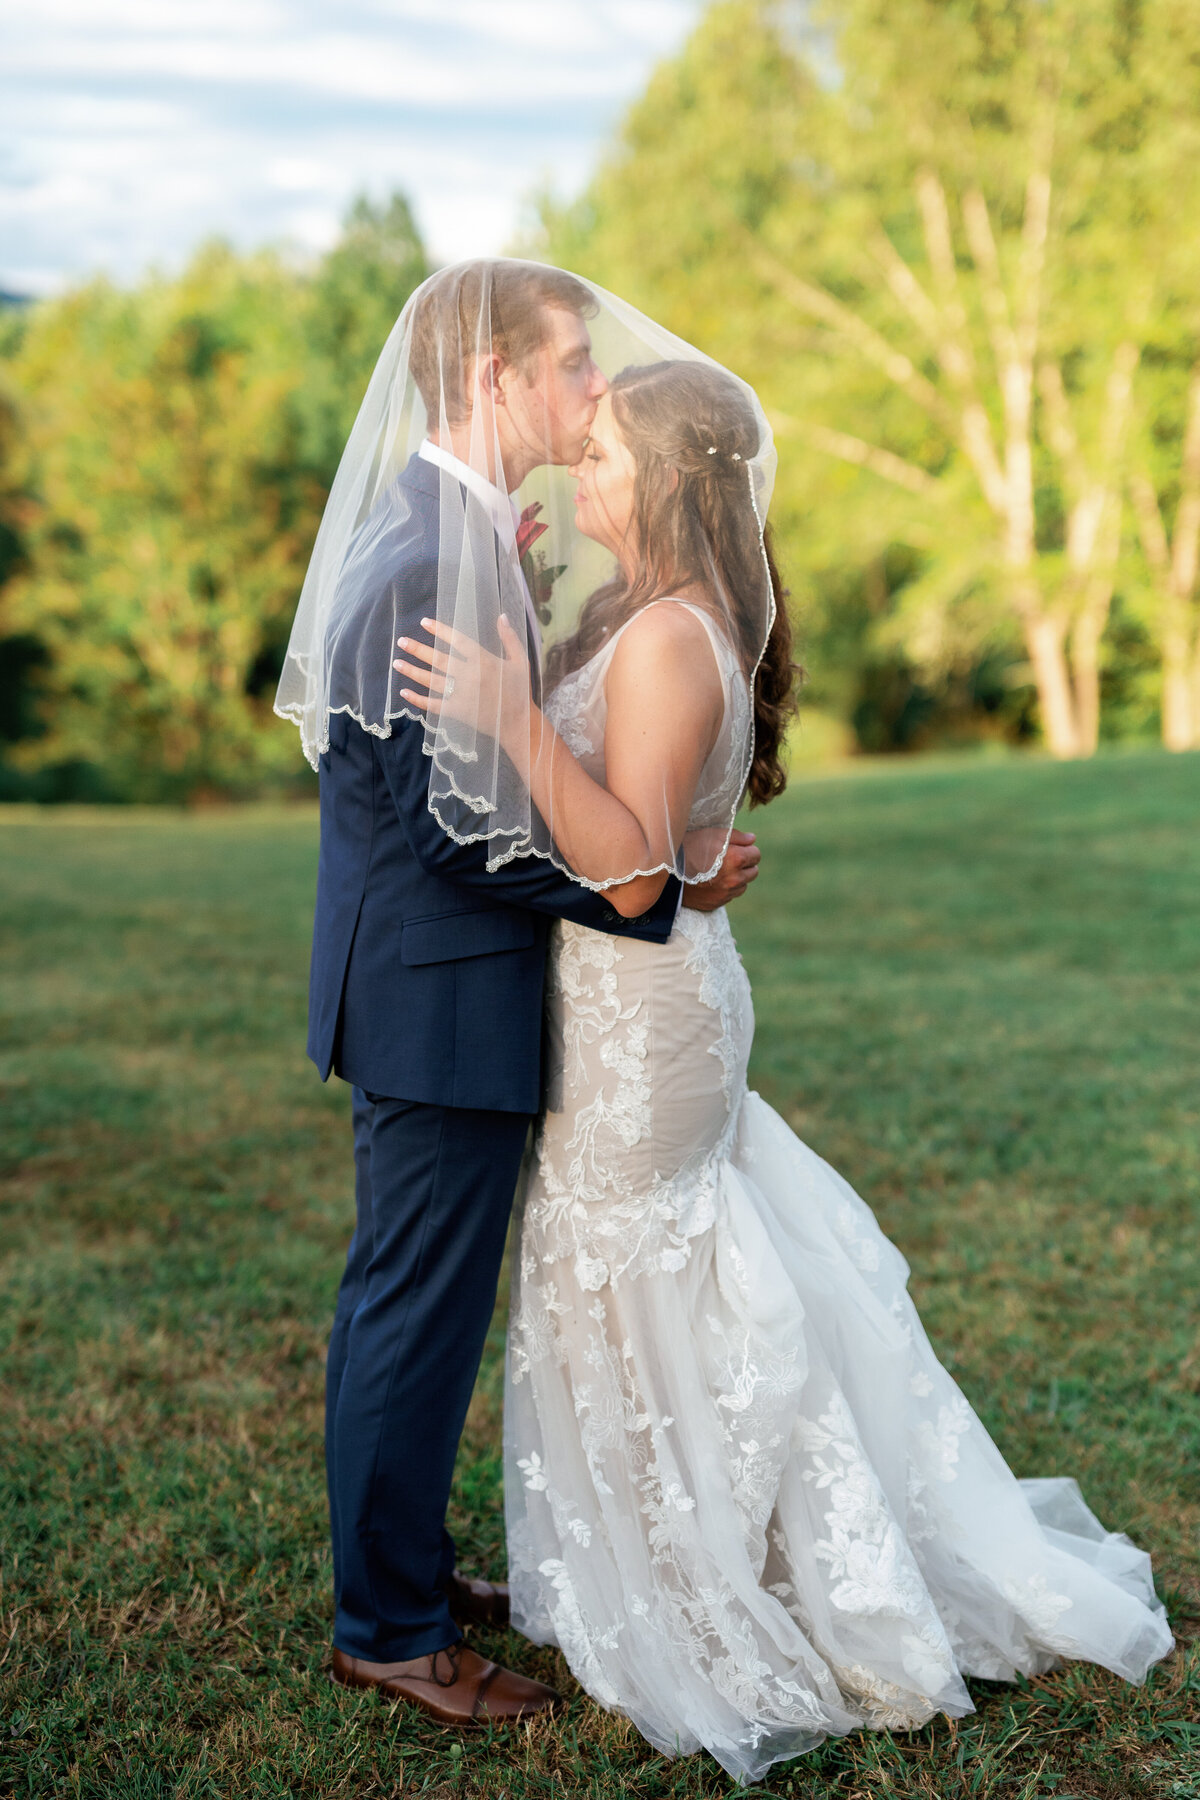 Alaina and Russ - Coopers Cove at Heritage Park - East Tennessee Wedding Photographer - Alaina René photography-192